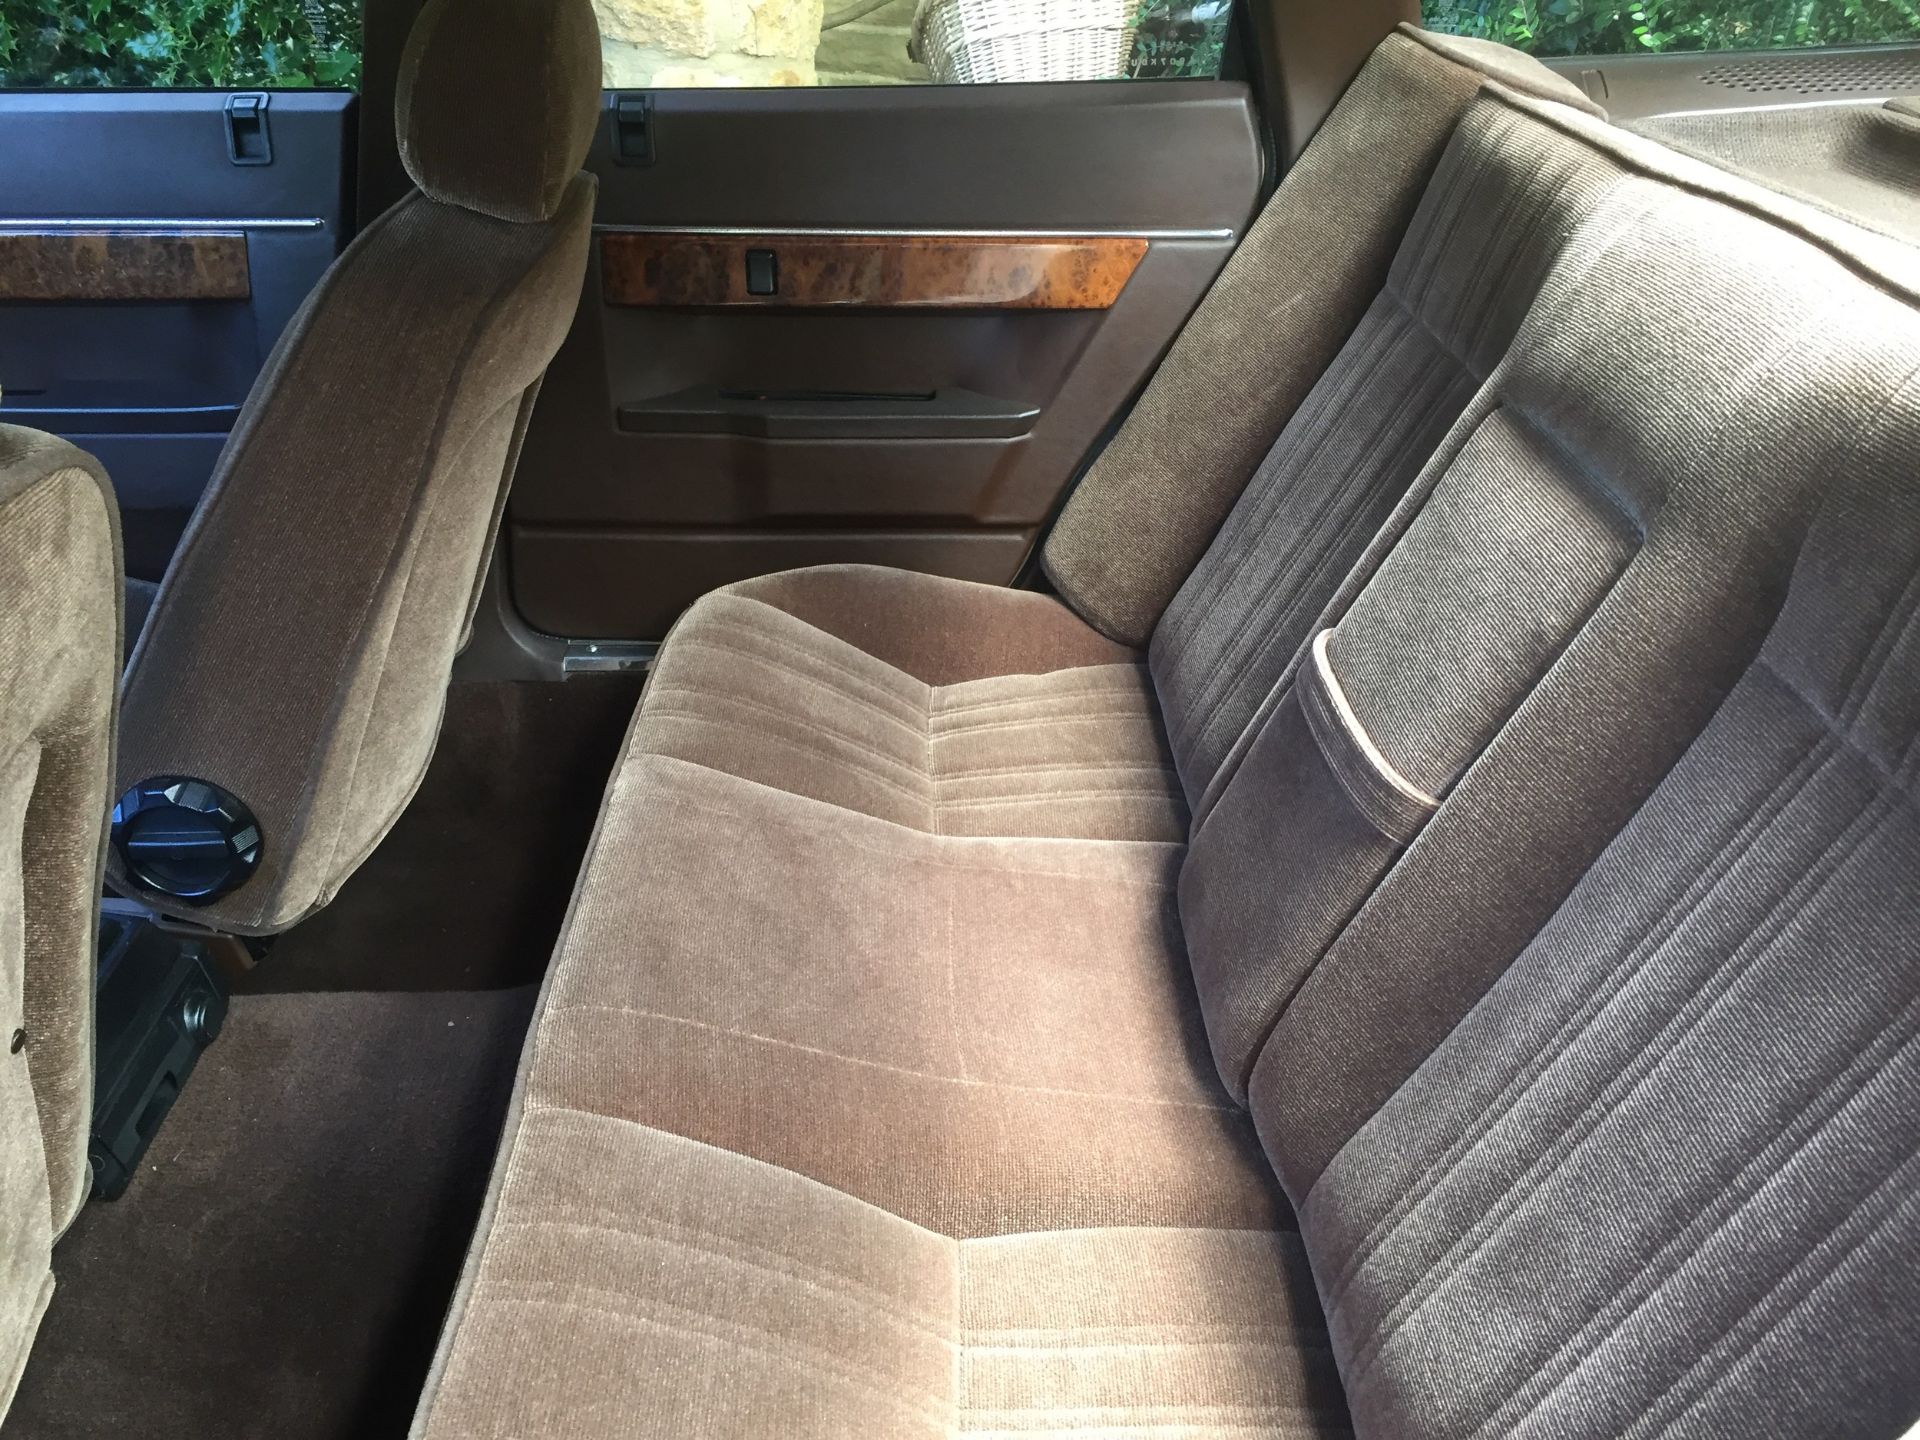 1984 Rover SD1 2300S Registration number A907 KDU Champagne Gold metallic Automatic Low miles - Image 10 of 14